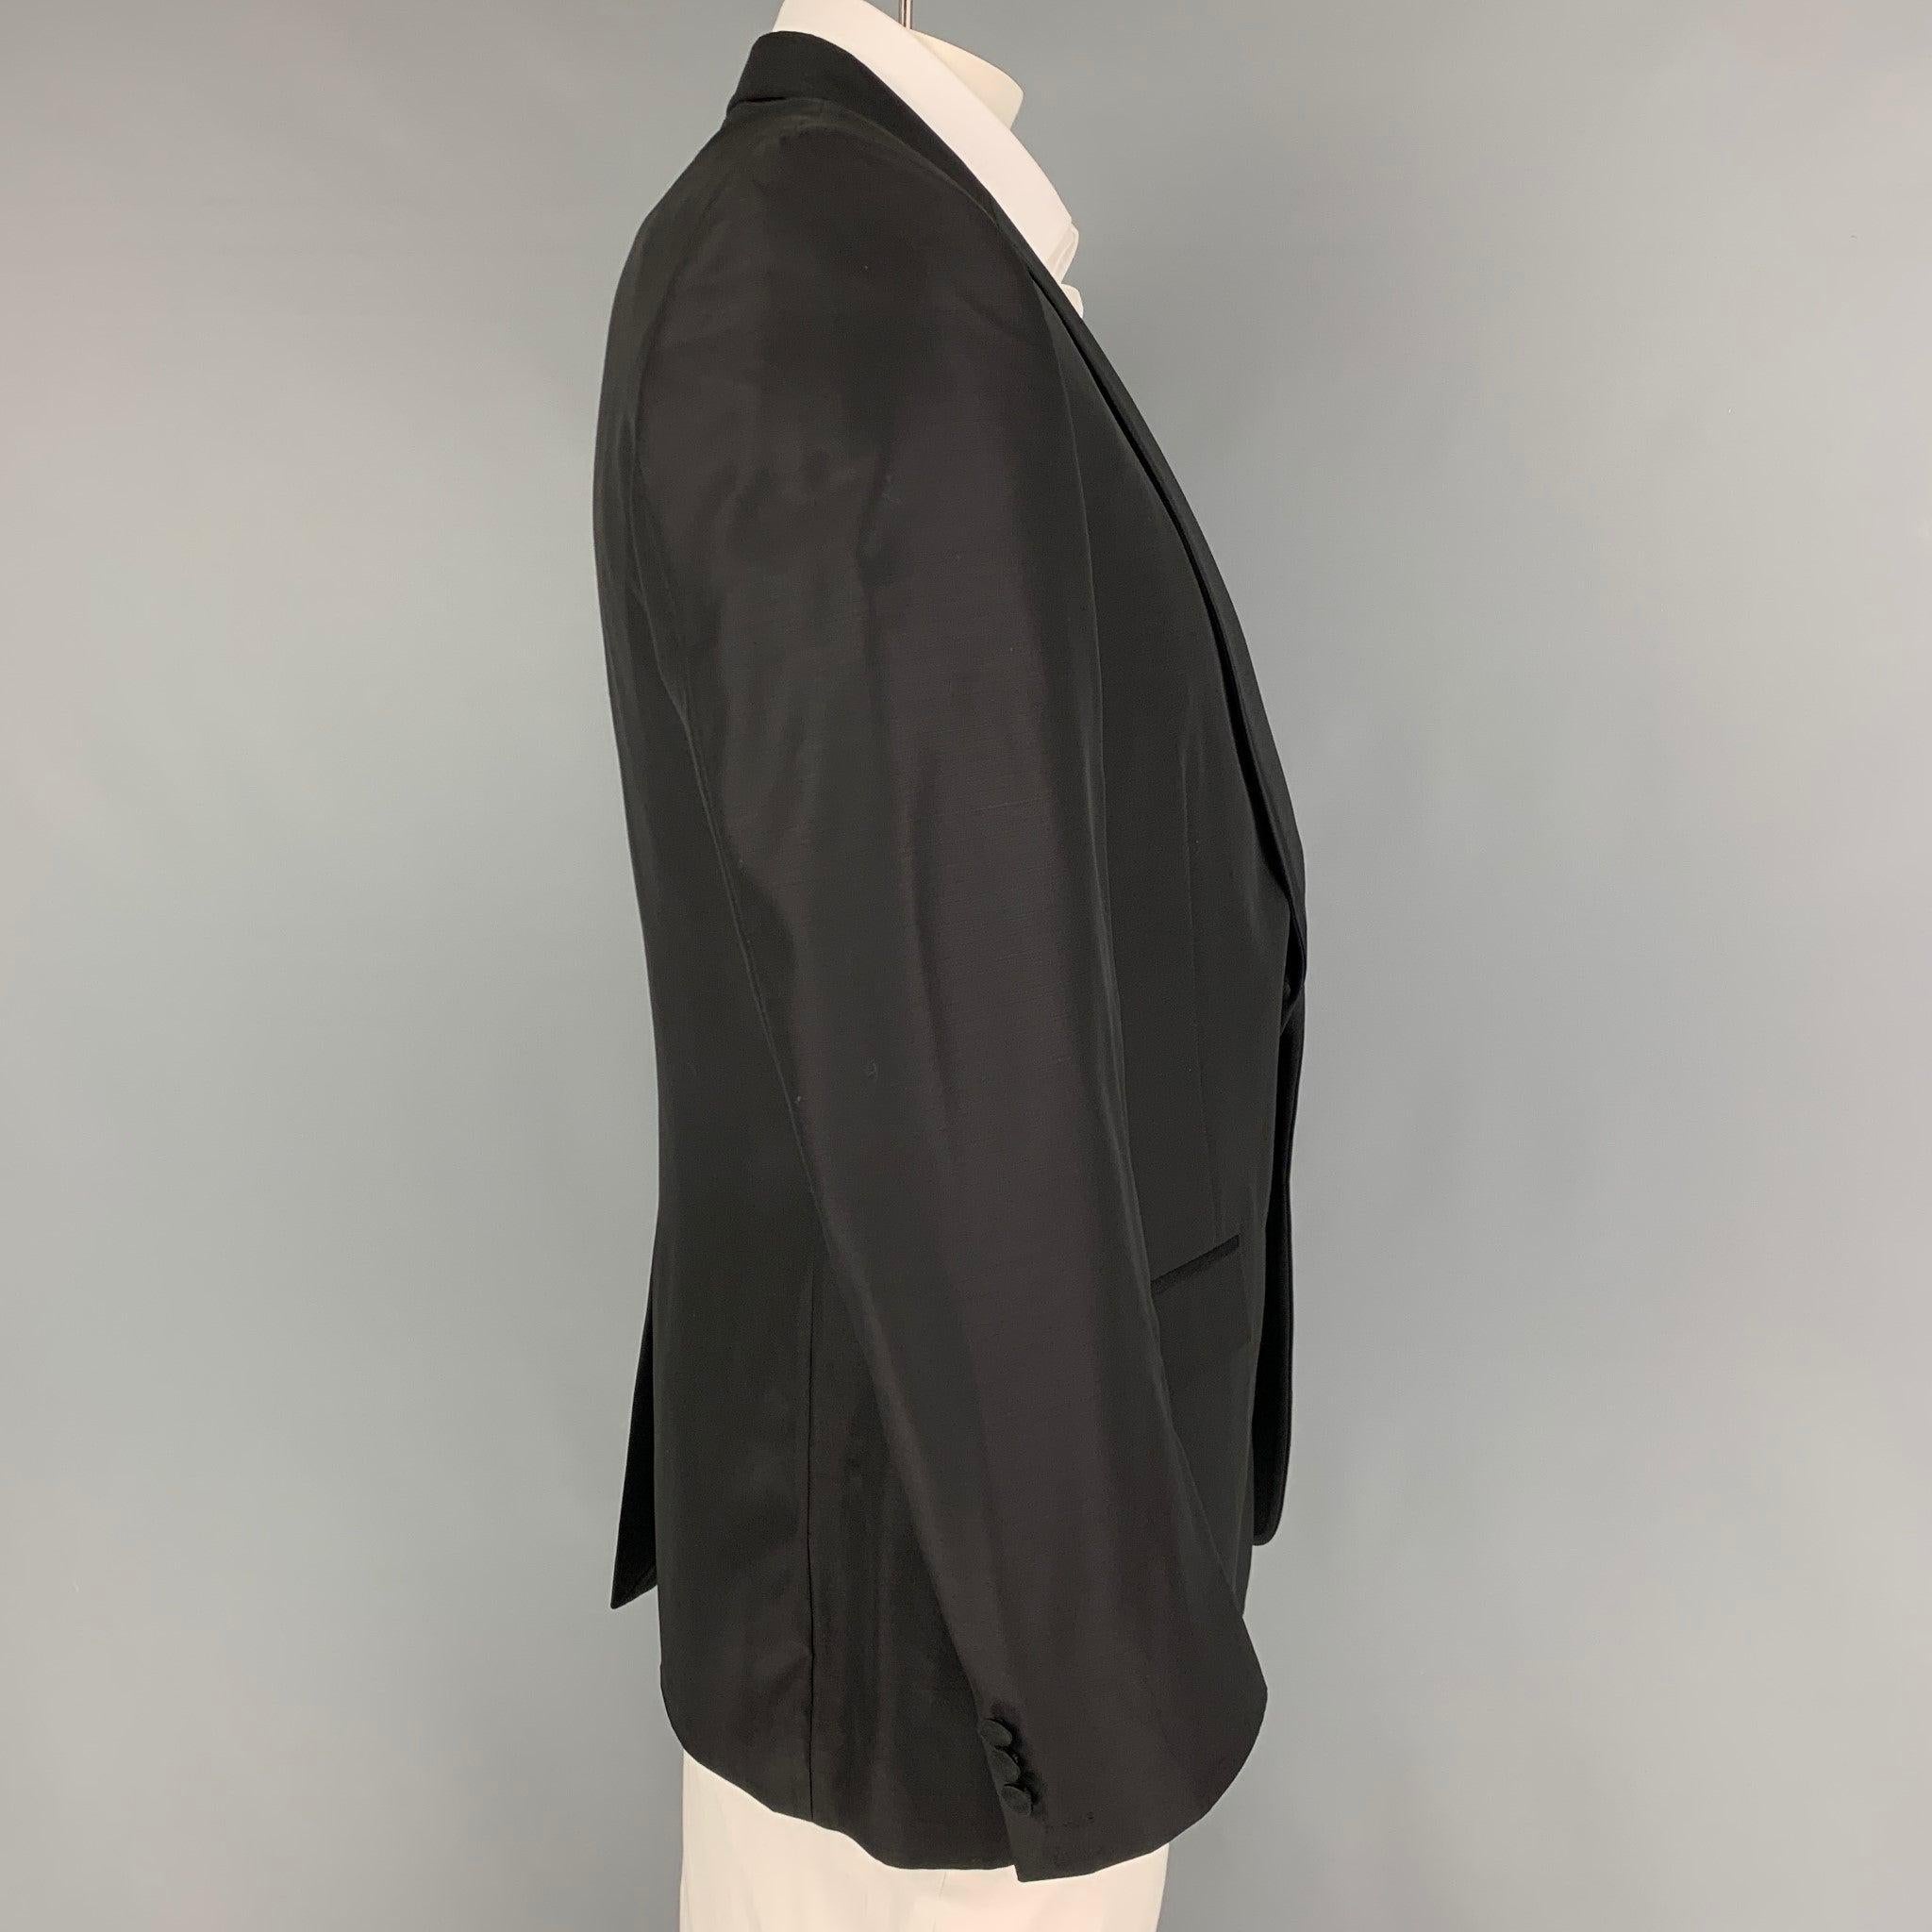 VERSACE COLLECTION sport coat comes on a black viscose / wool with a full liner featuring a shawl collar, flap pockets, single back vent, and a double button closure.
Very Good
Pre-Owned Condition. 

Marked:   52 

Measurements: 
 
Shoulder: 18